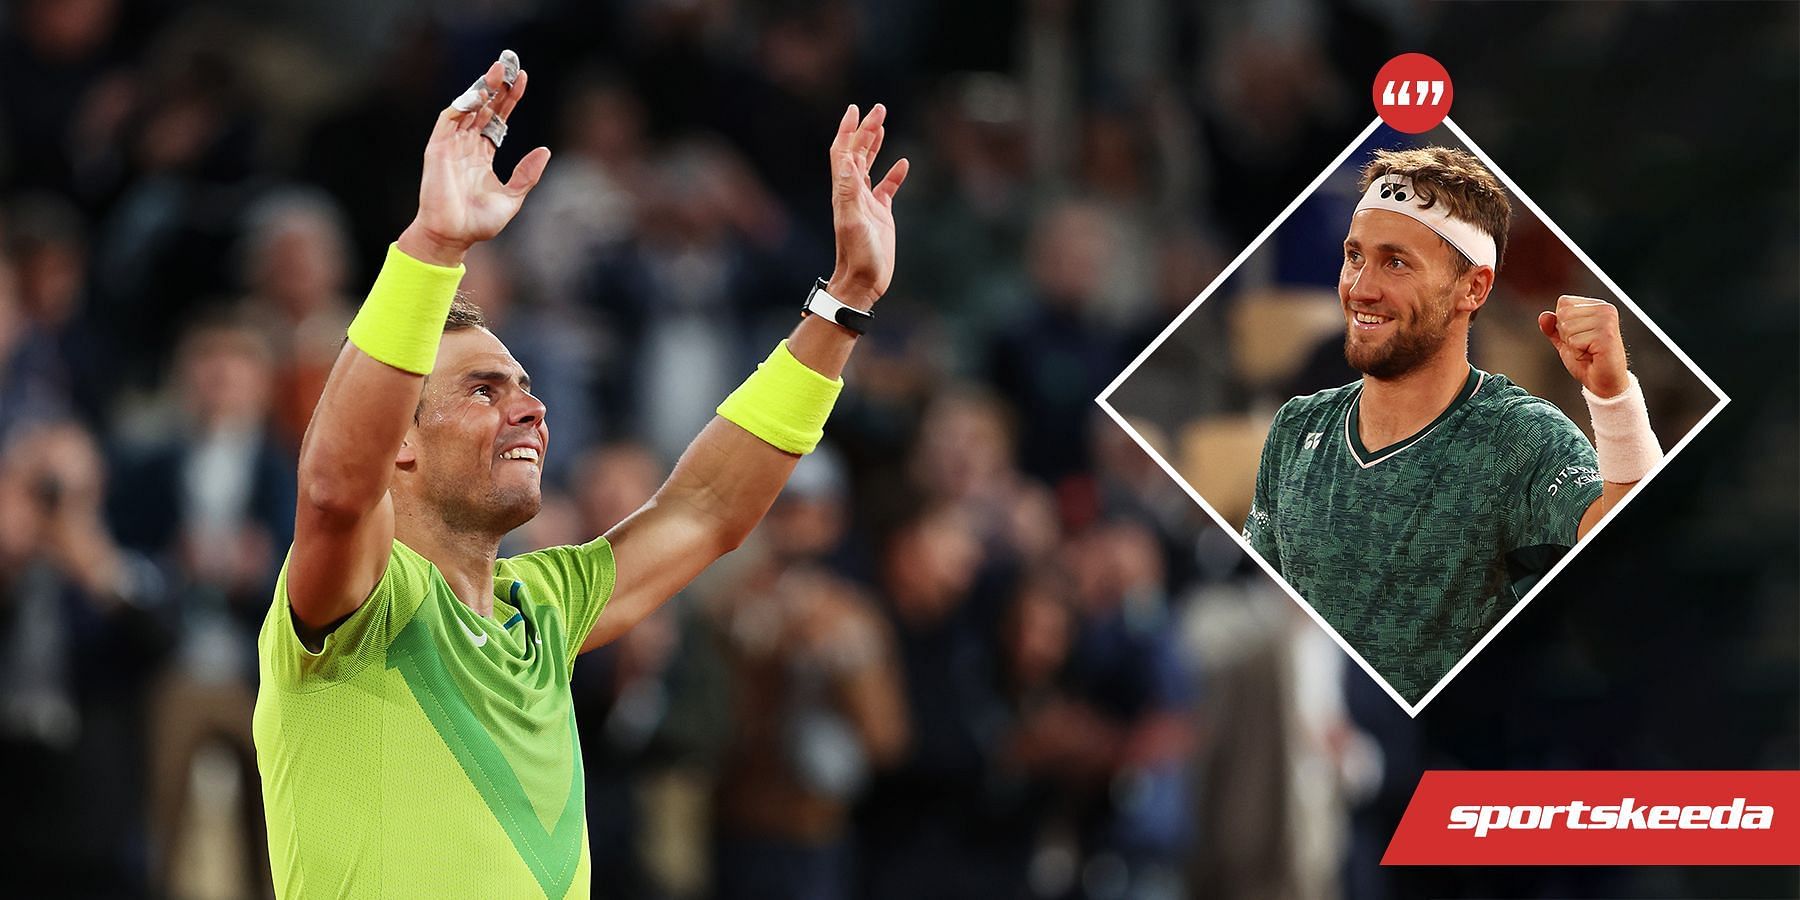 Casper Ruud takes on Rafael Nadal in the final of the 2022 French Open